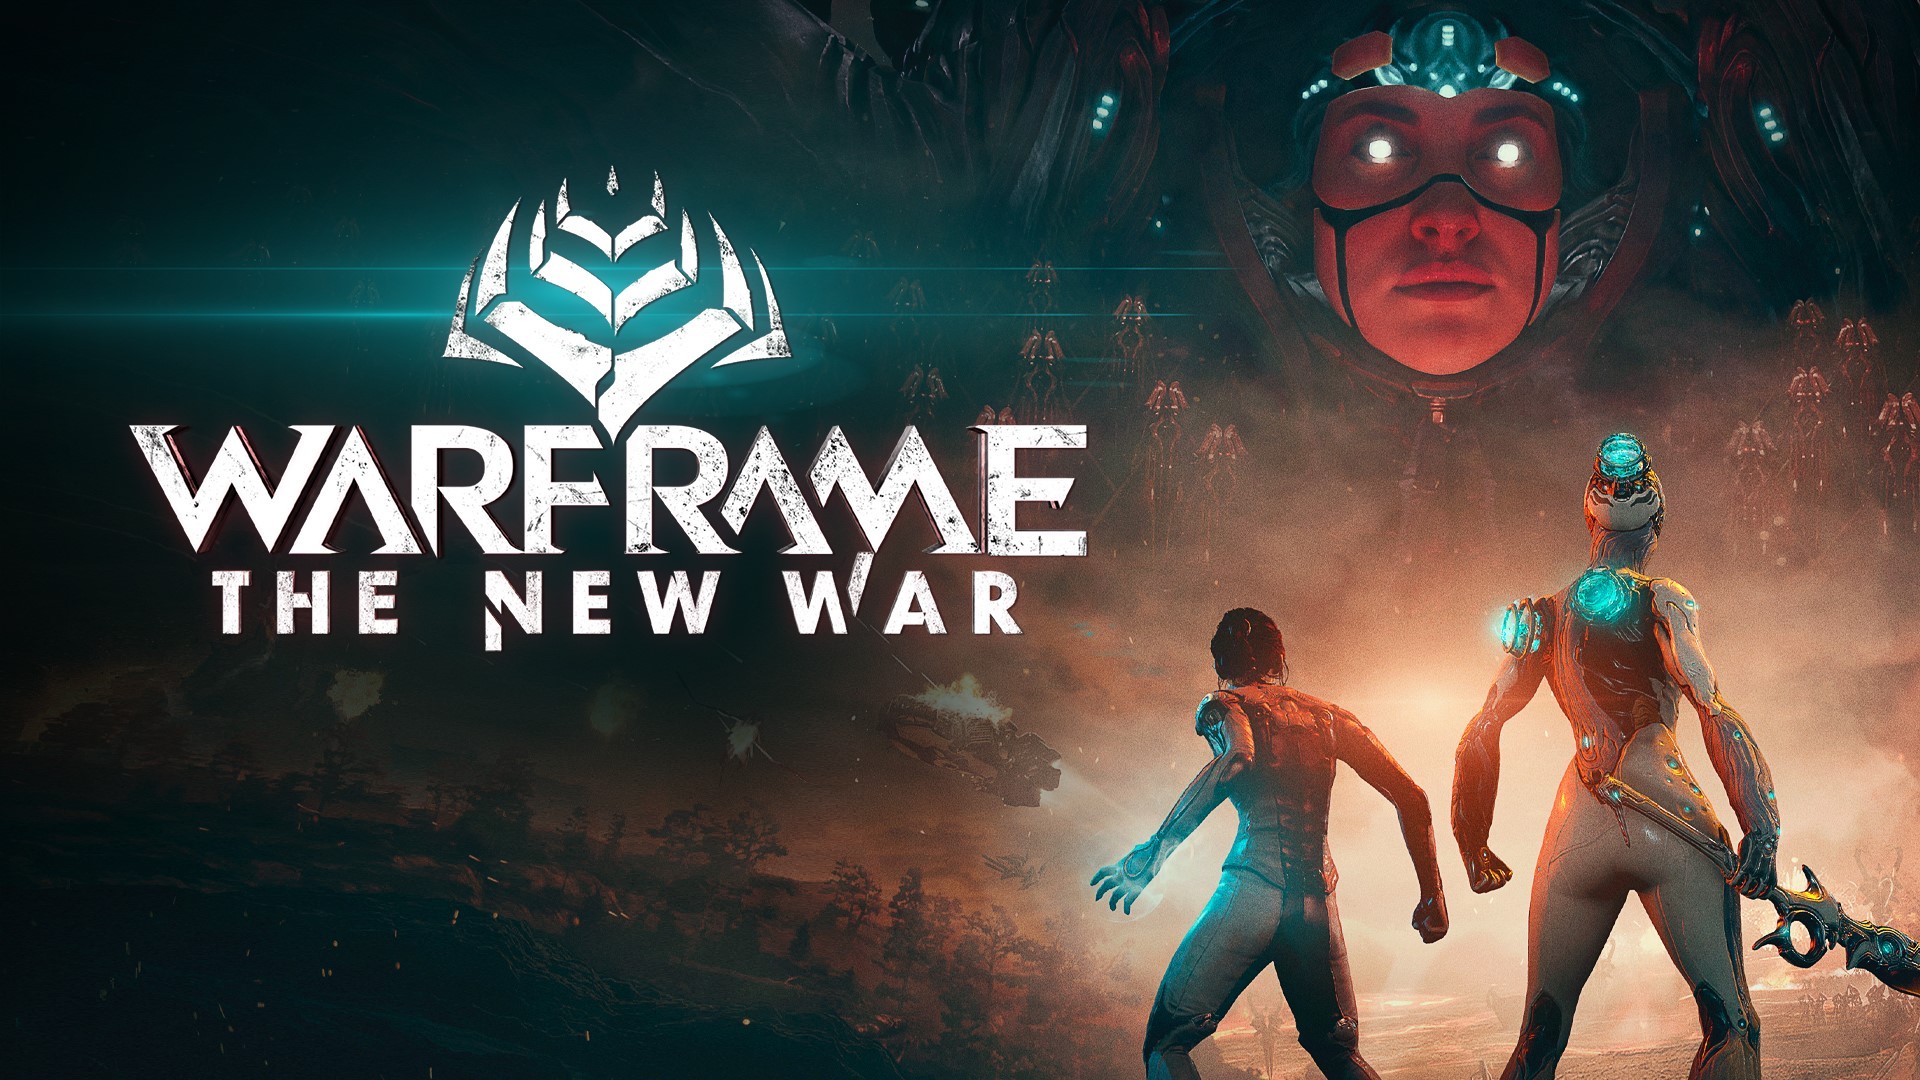 Video For Warframe: The New War is Here and the Origin System Will Never Be the Same